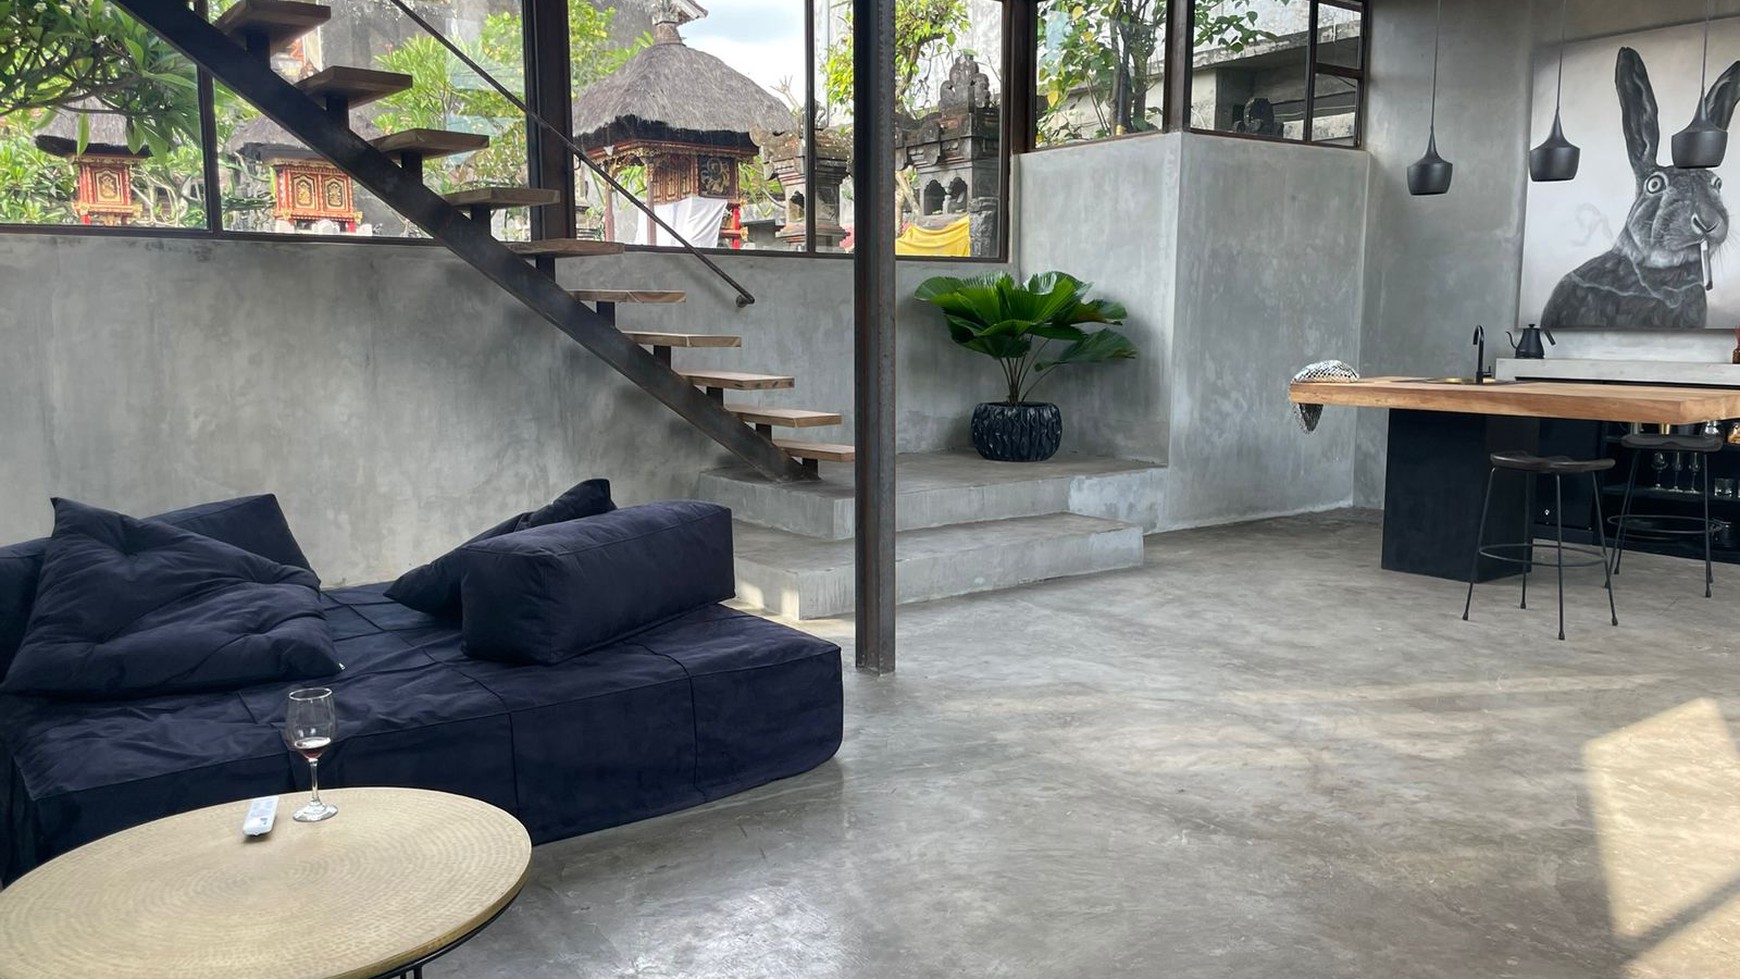 For Sale, A Beautiful 1 Bedroom Leasehold City House In great Location - Heart Of Ubud